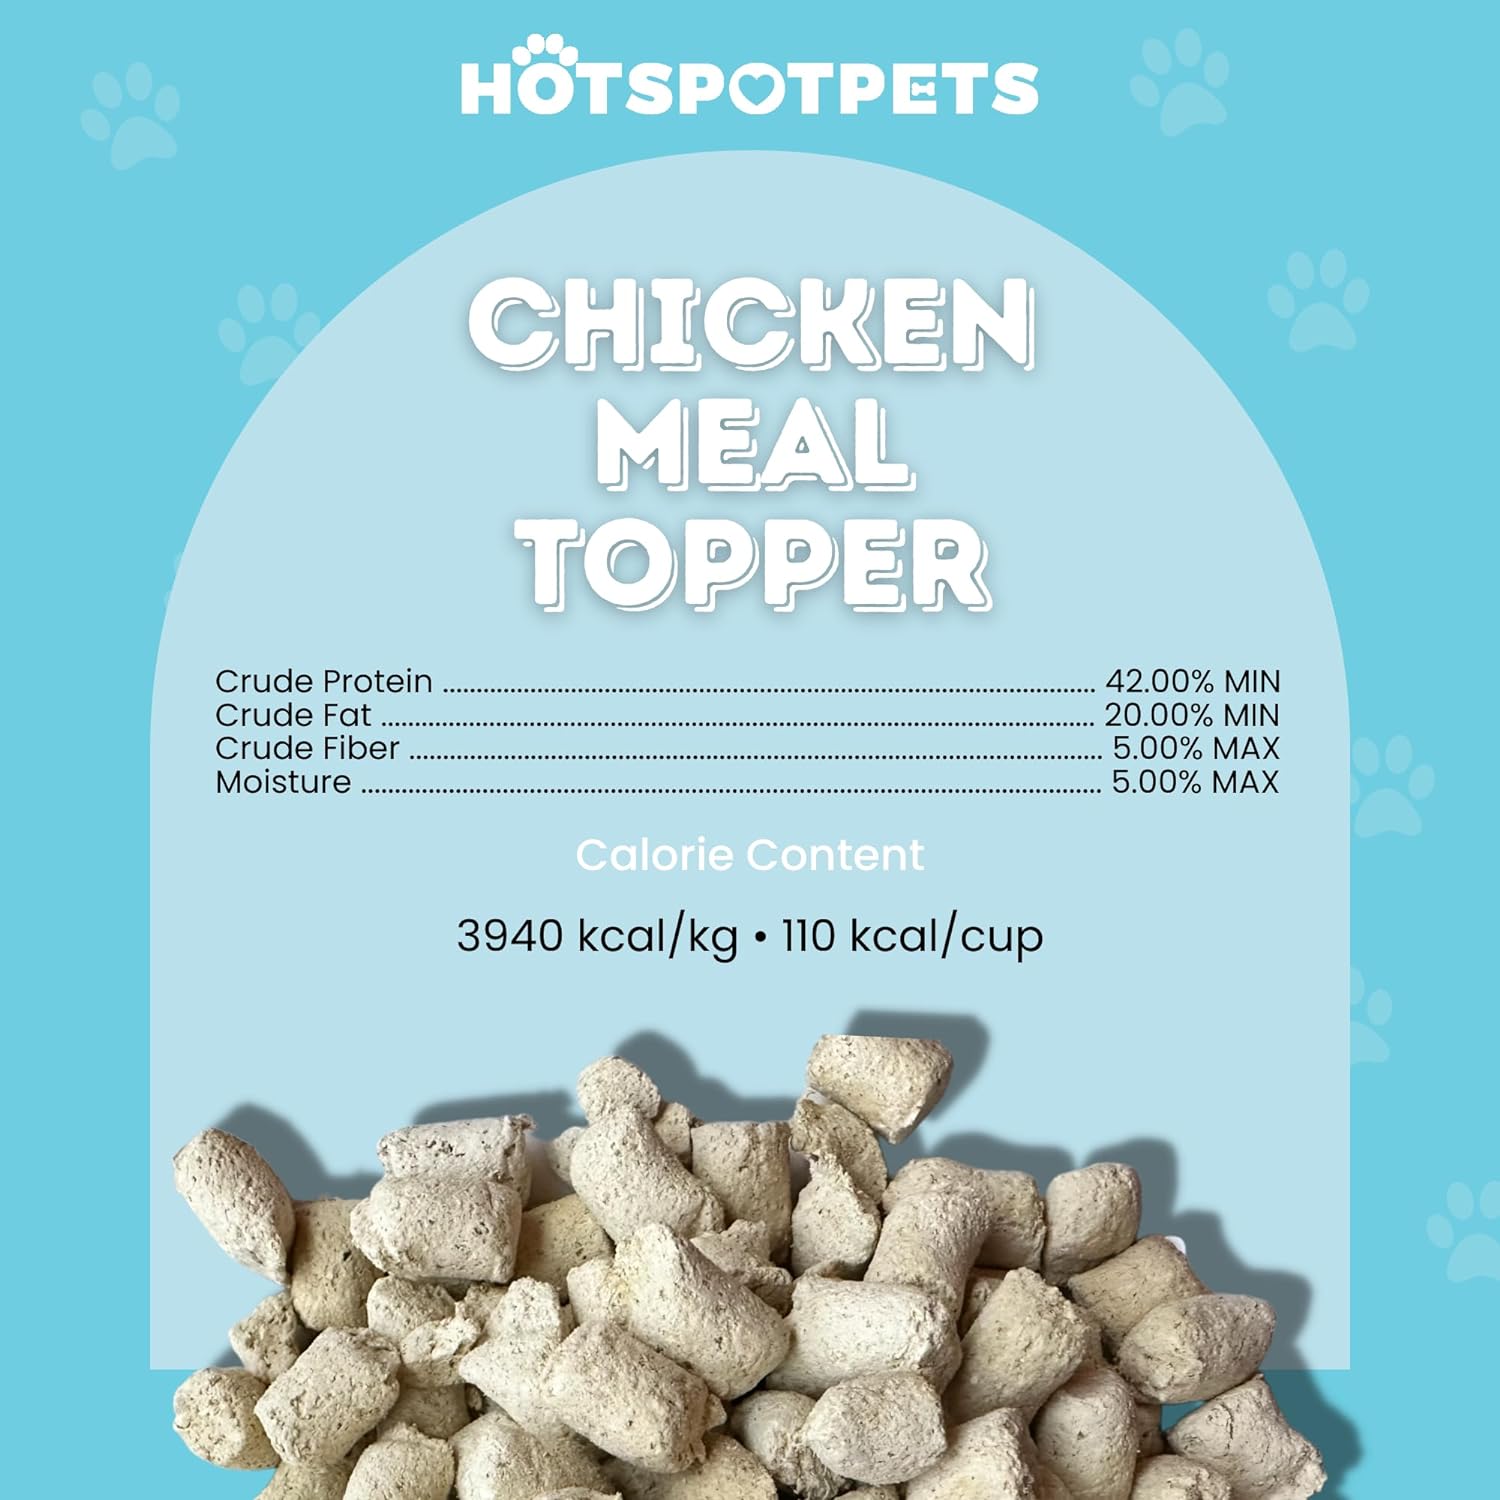 hotspot pets Freeze Dried Raw Chicken Meal Toppers for Dogs - Single Protein,All Natural, Grain-Free- Perfect for Training, Topper or Snack - Made in USA - (Chicken Meal Toppers) 1LB Bag : Pet Supplies